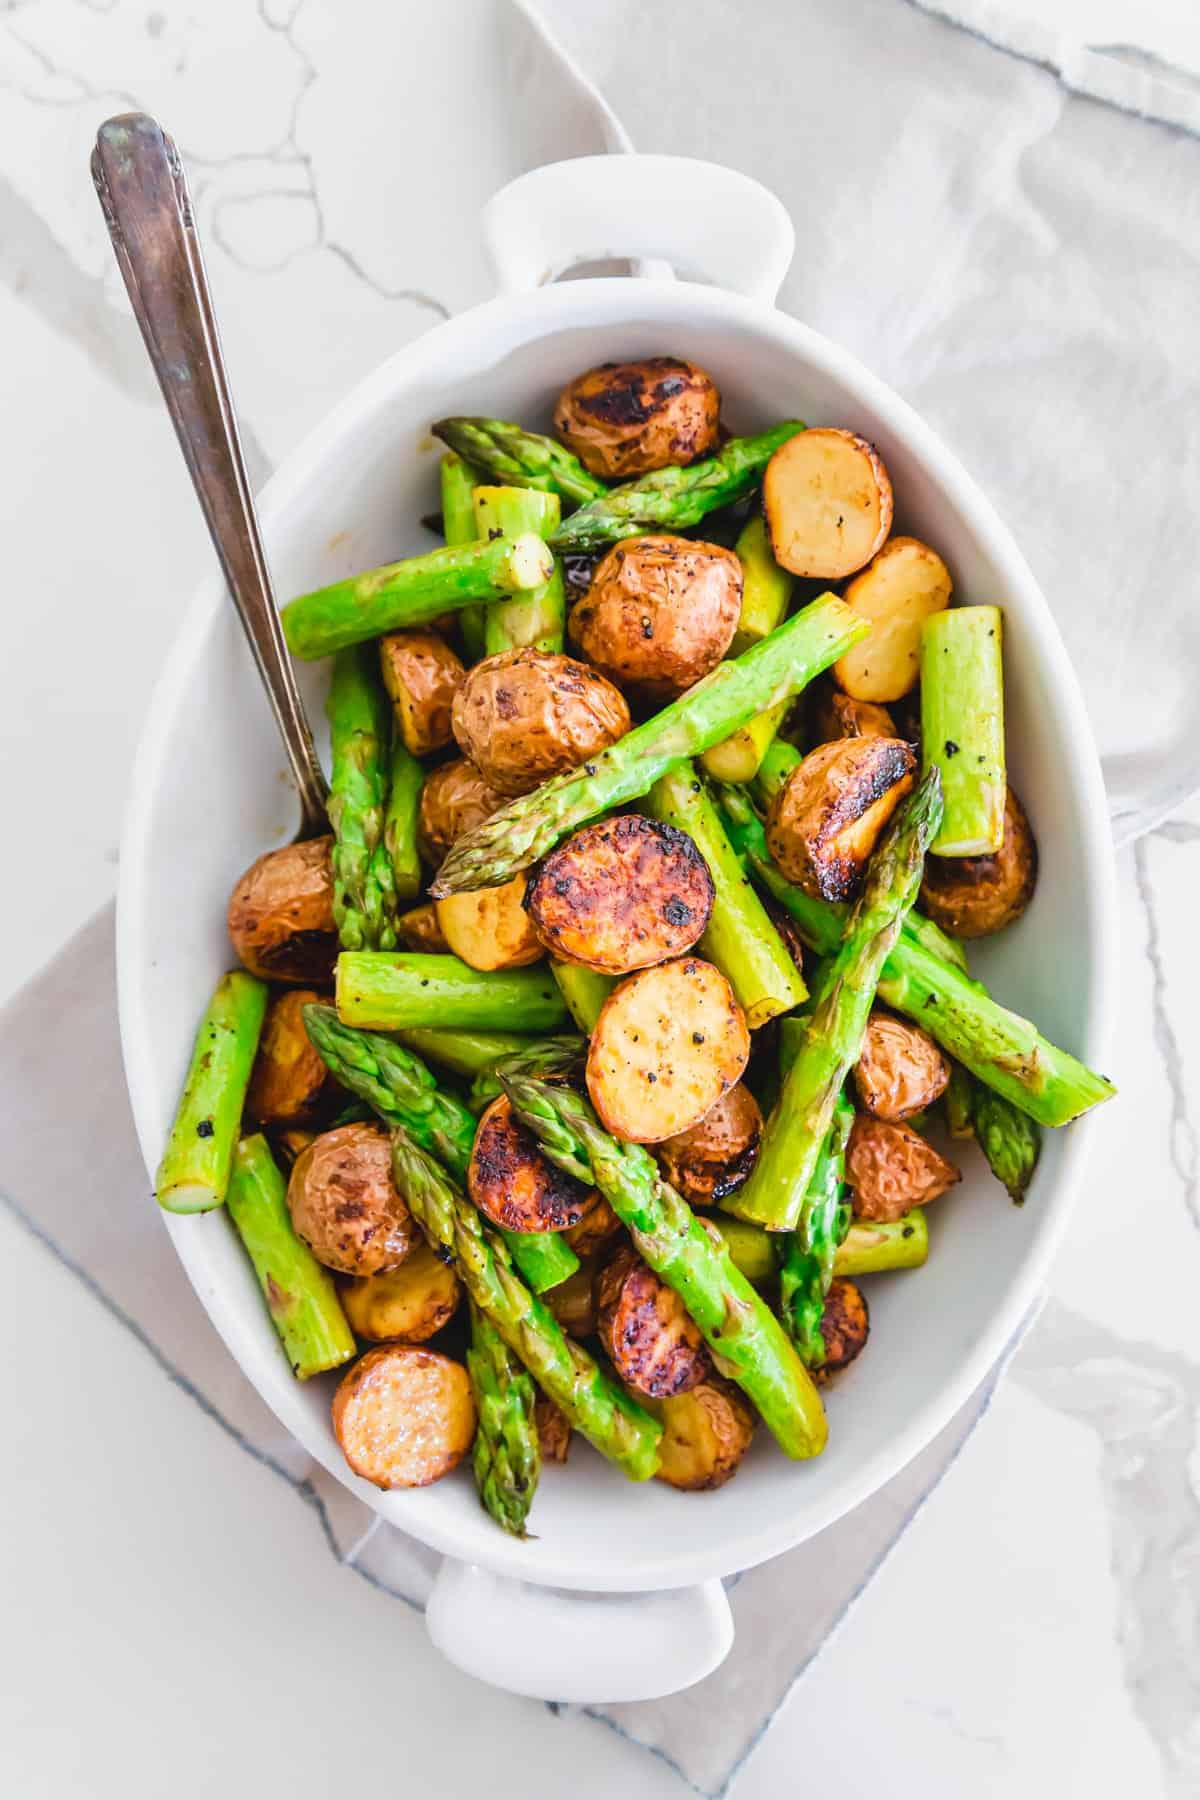 An easy side dish recipe of roasted potatoes and tender crisp asparagus with balsamic vinegar and garlic seasoning.